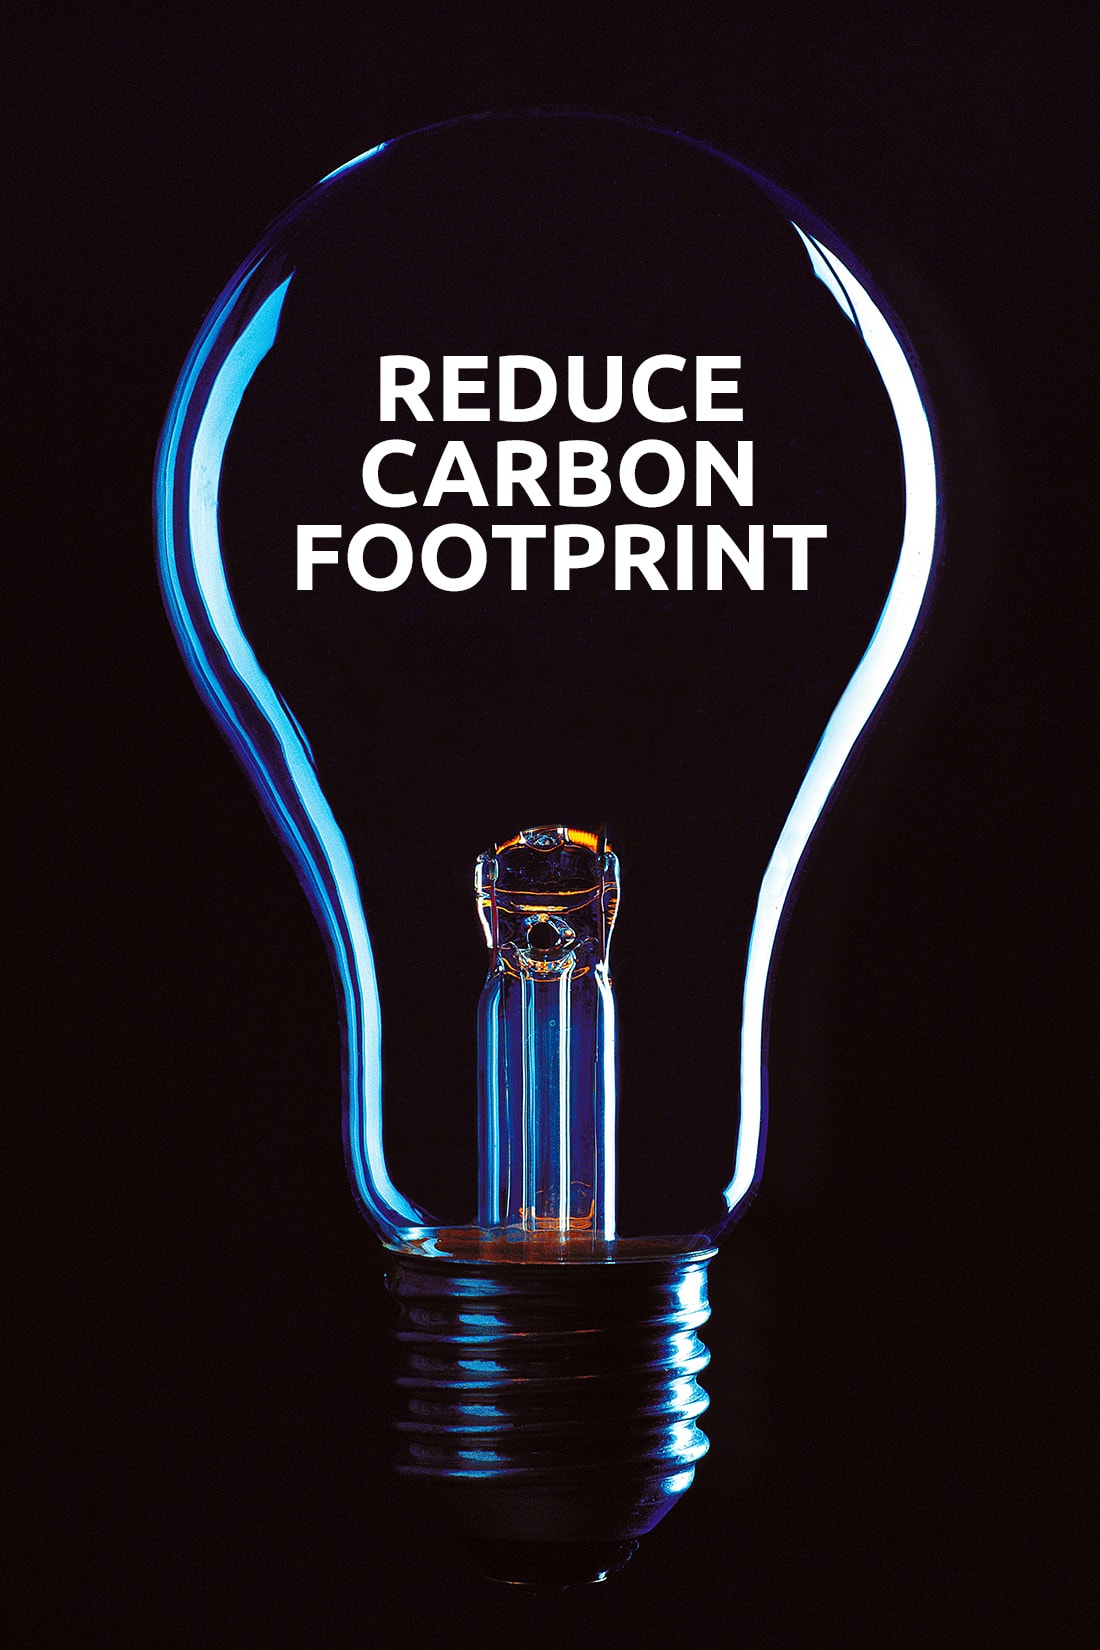 How Can Businesses Reduce Their Carbon Footprint?